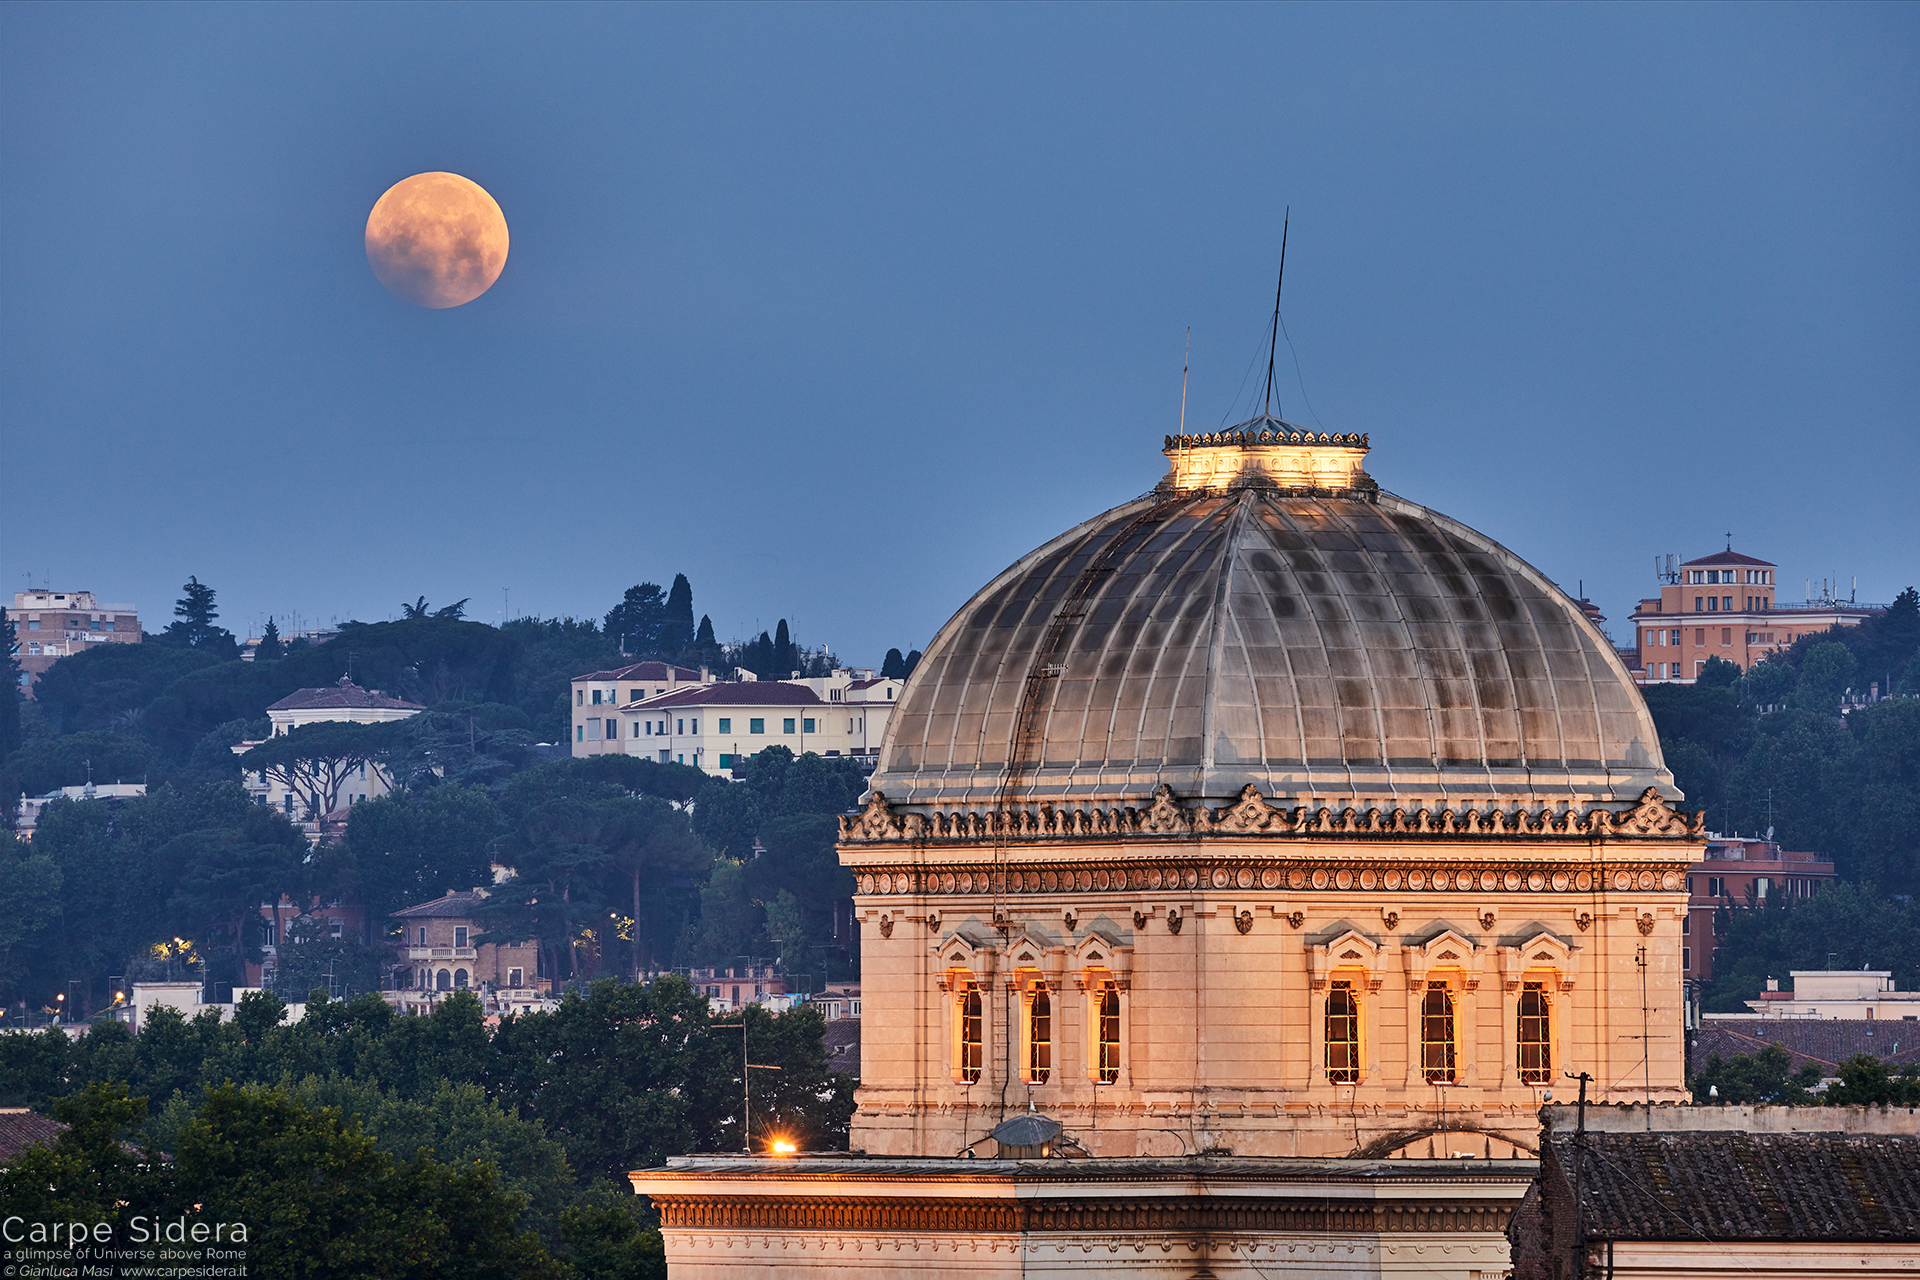 While it sets behind the Synagogue of Rome, the full Moon plays with some clouds